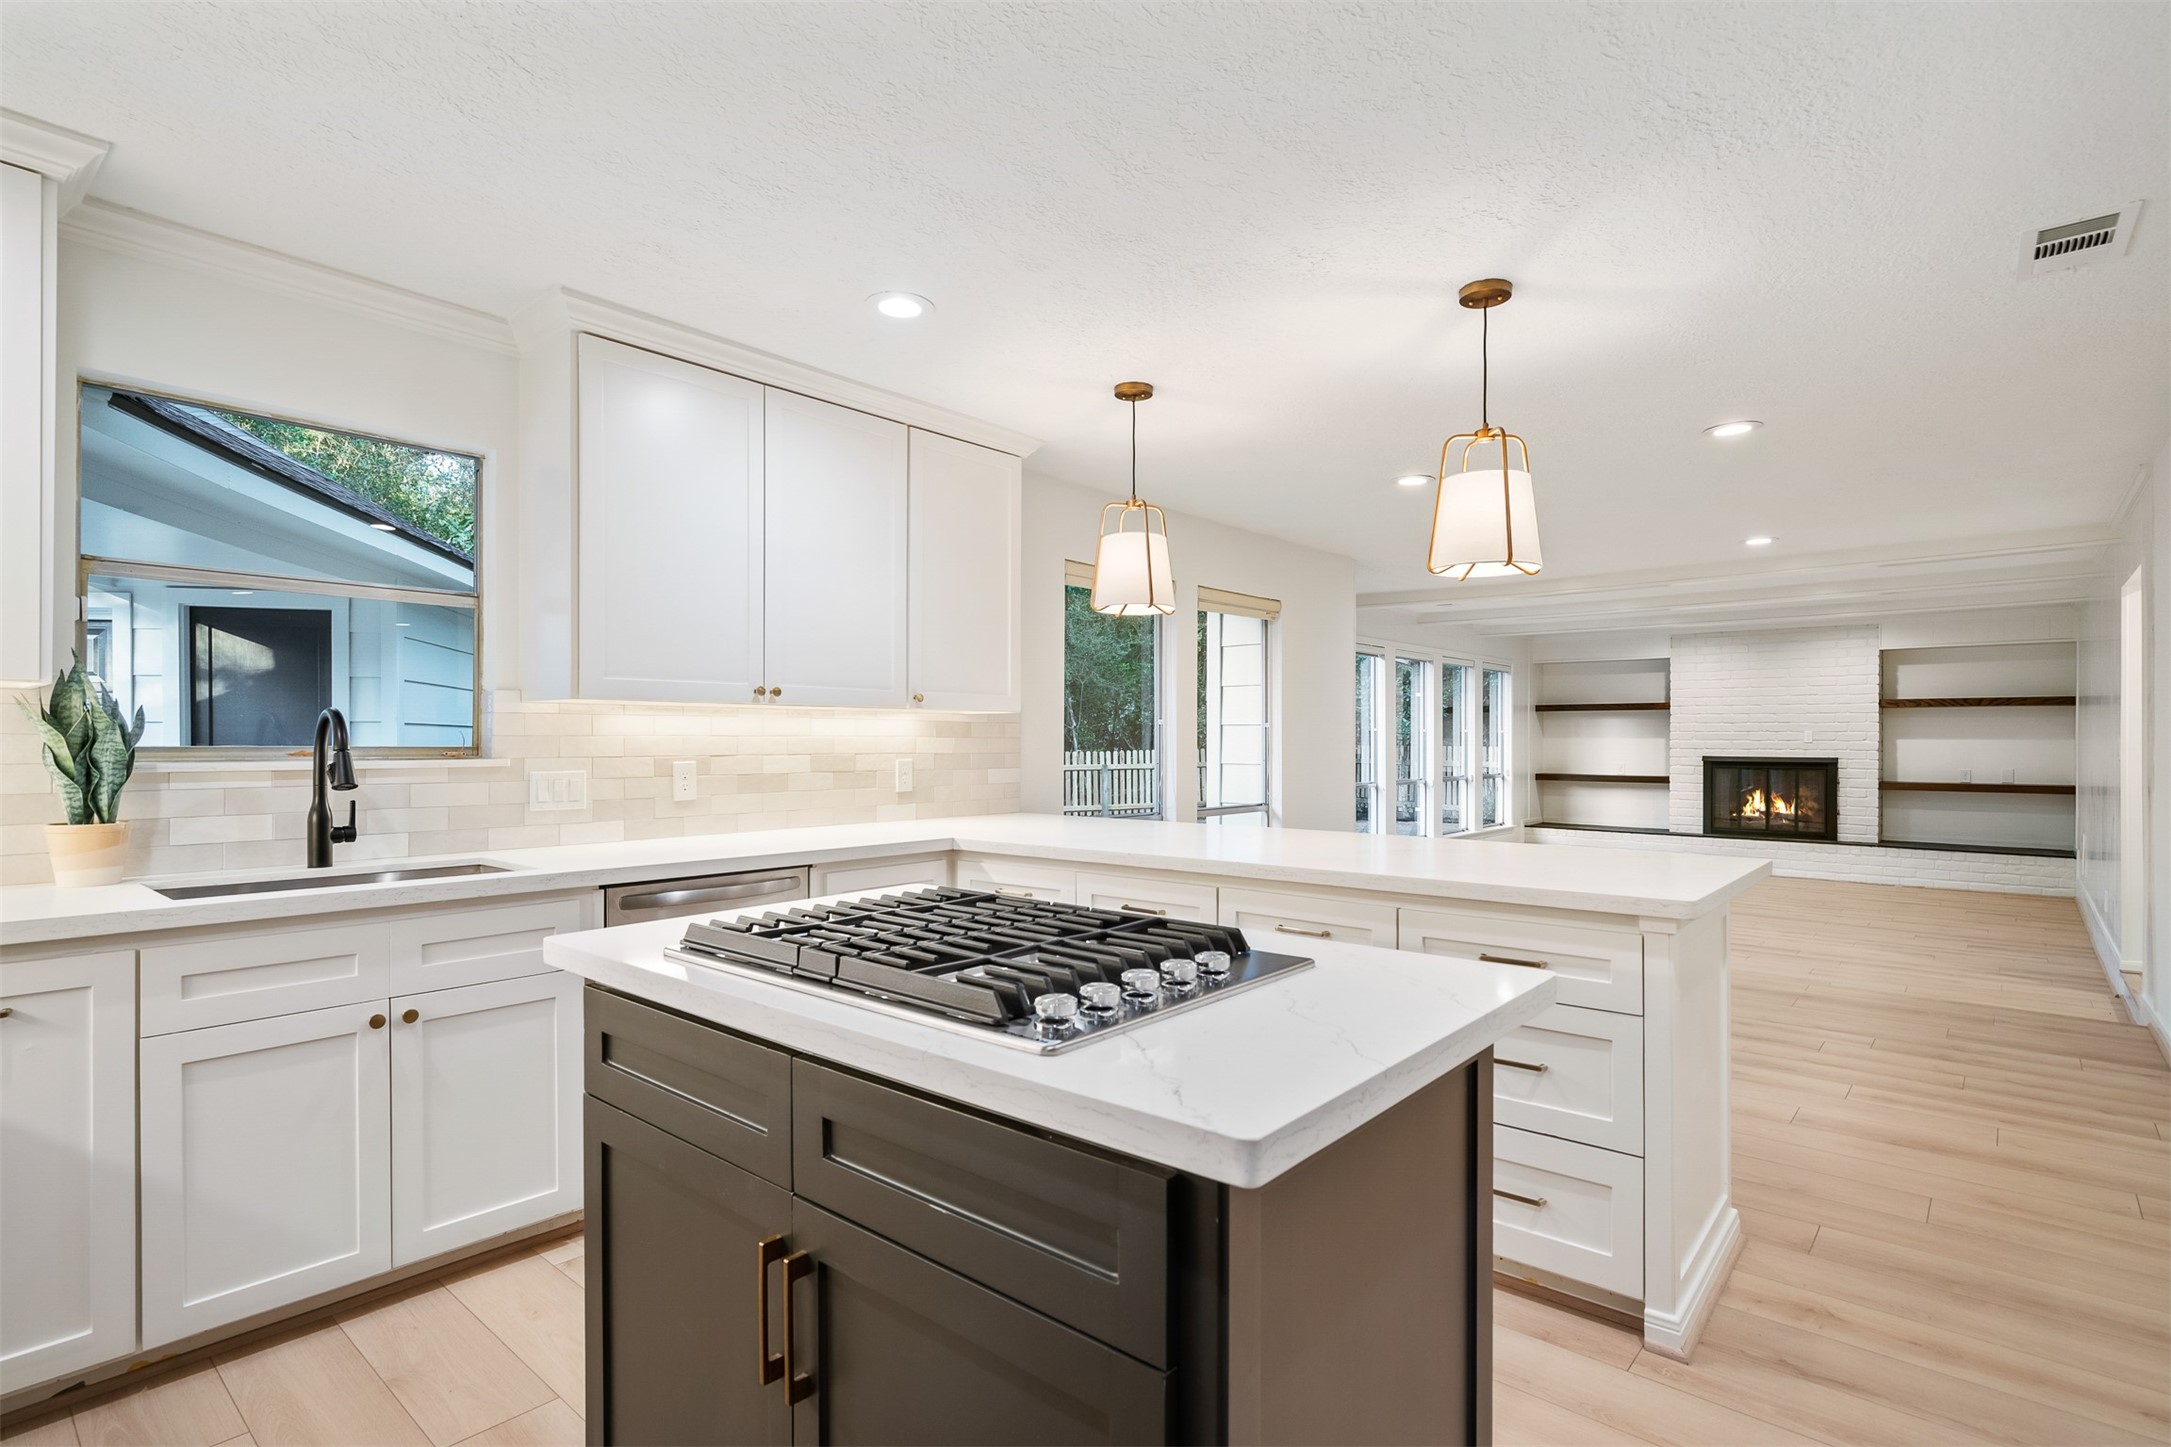 Stunningly remodeled kitchen with gas cooktop, electric oven, quartz countertops and ceramic backsplash.